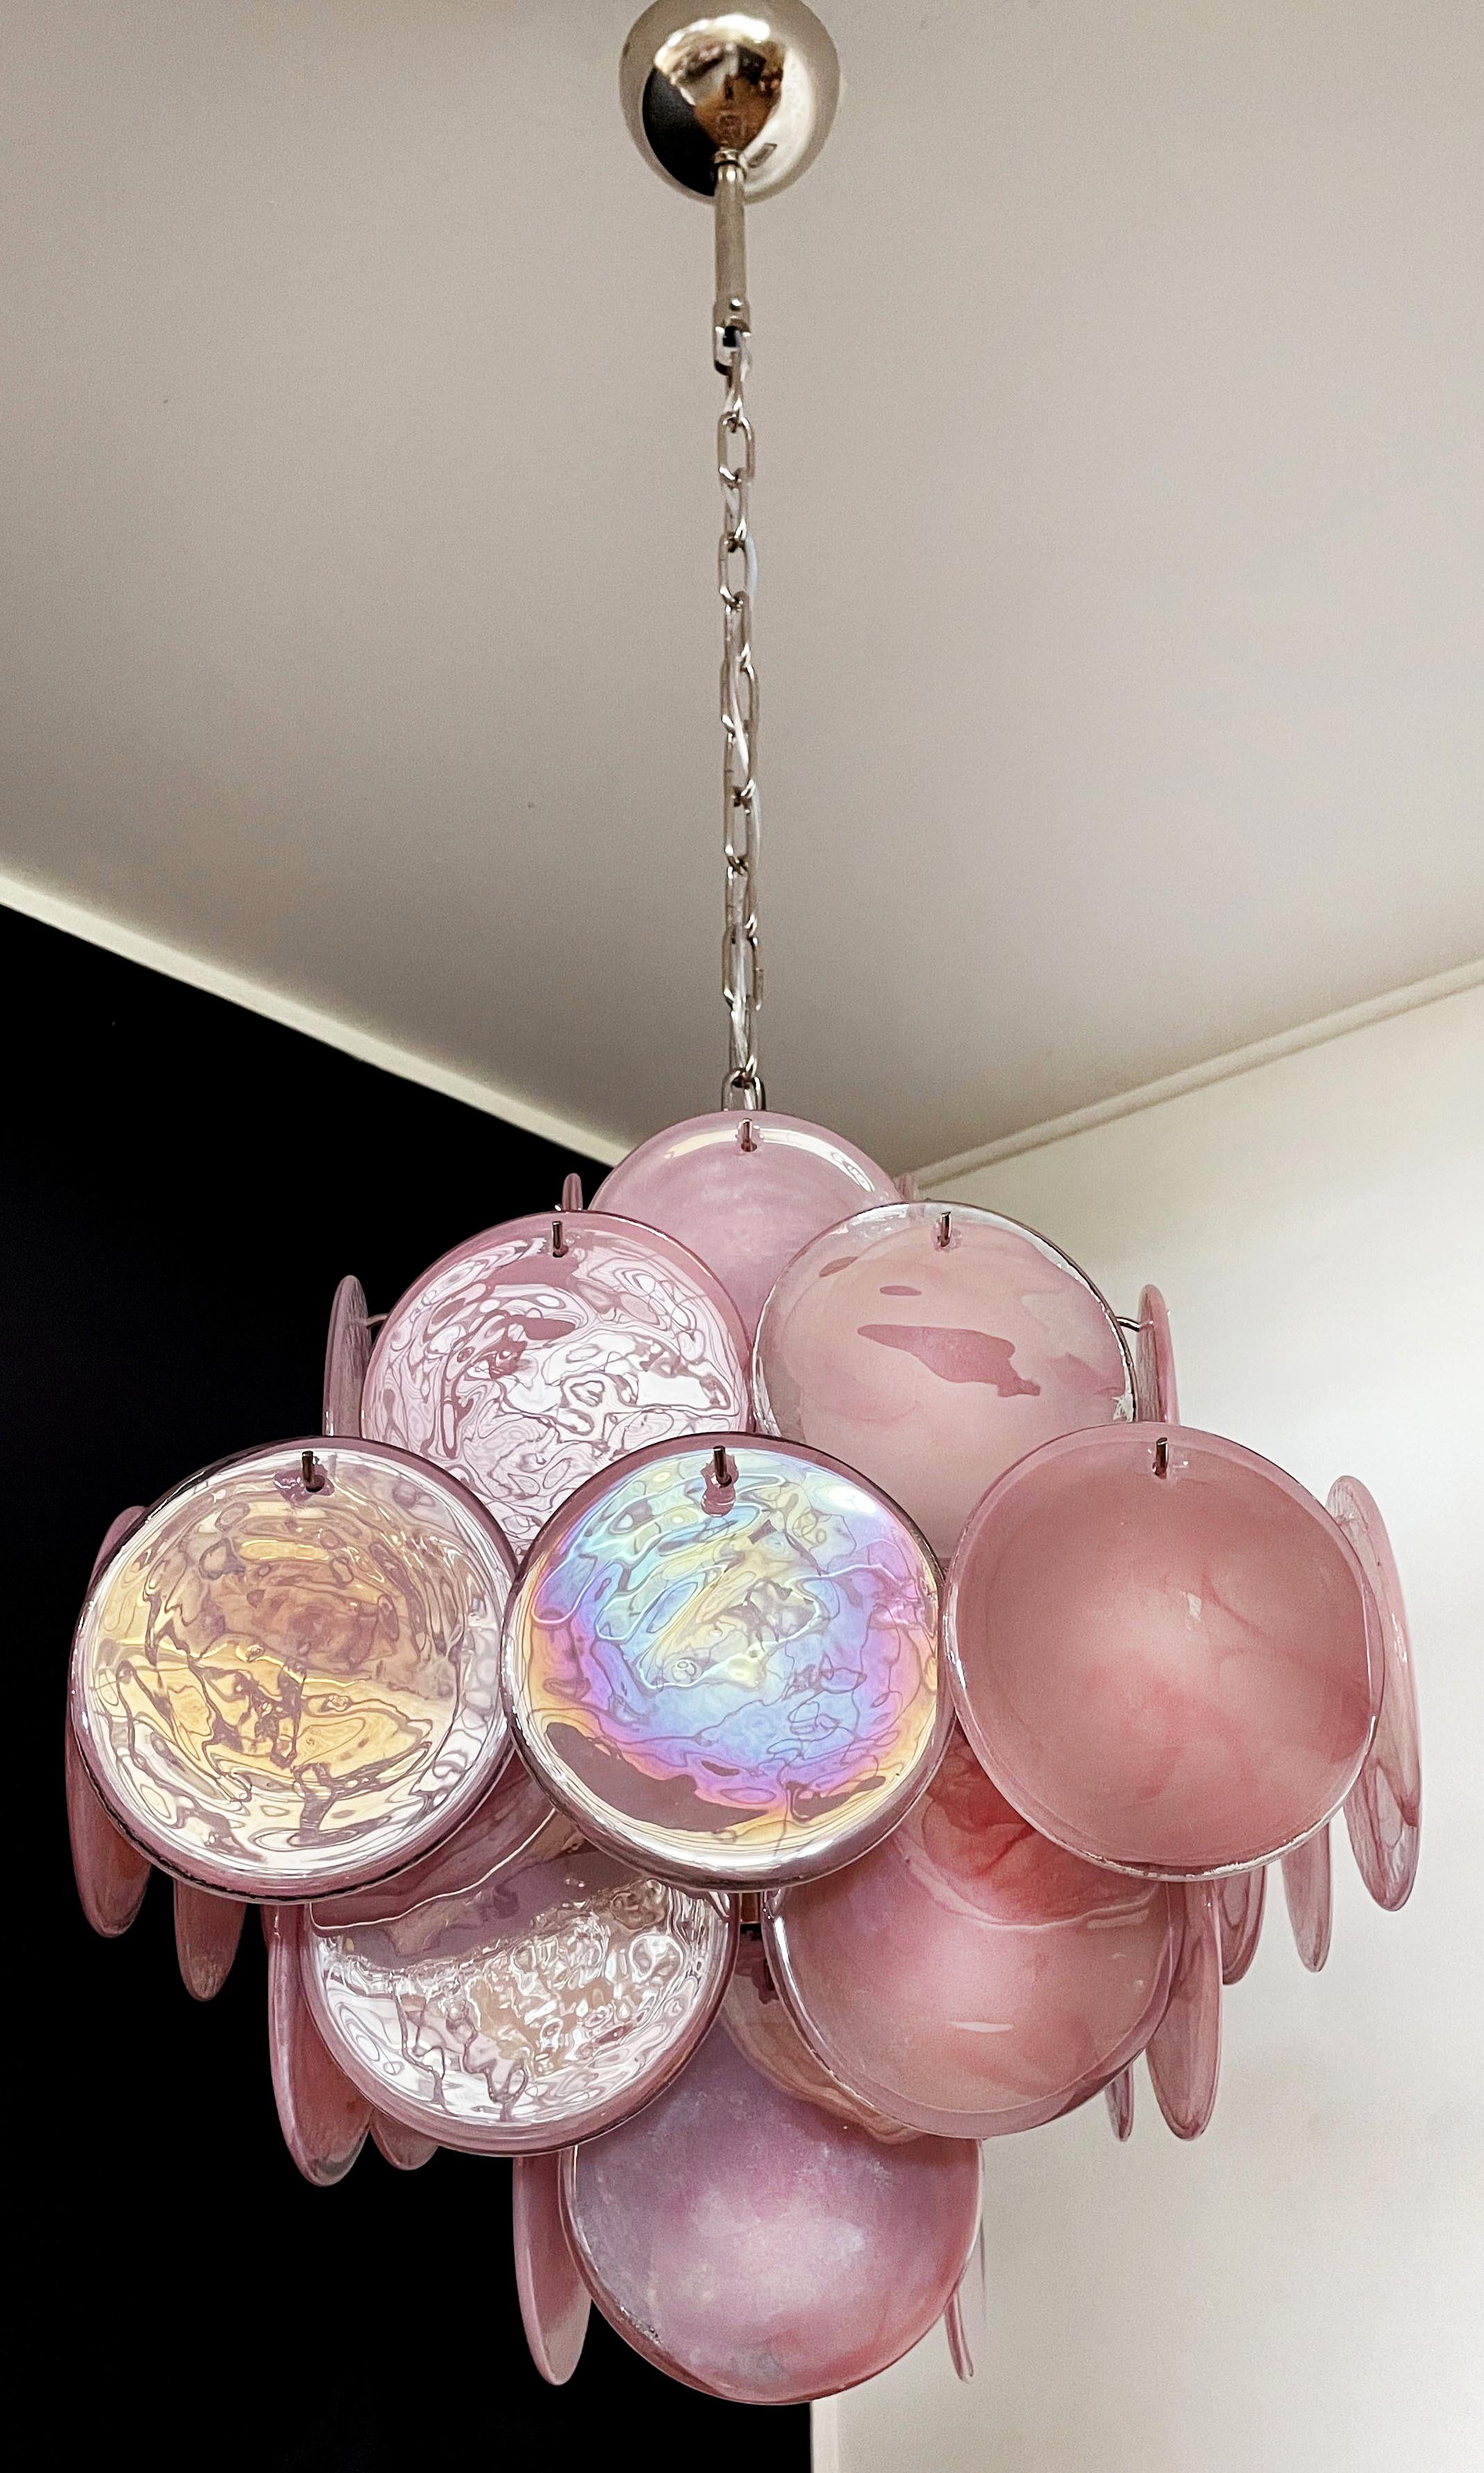 Italian Pair of Disc Pink Murano Glass Chandeliers by Vistosi Style For Sale